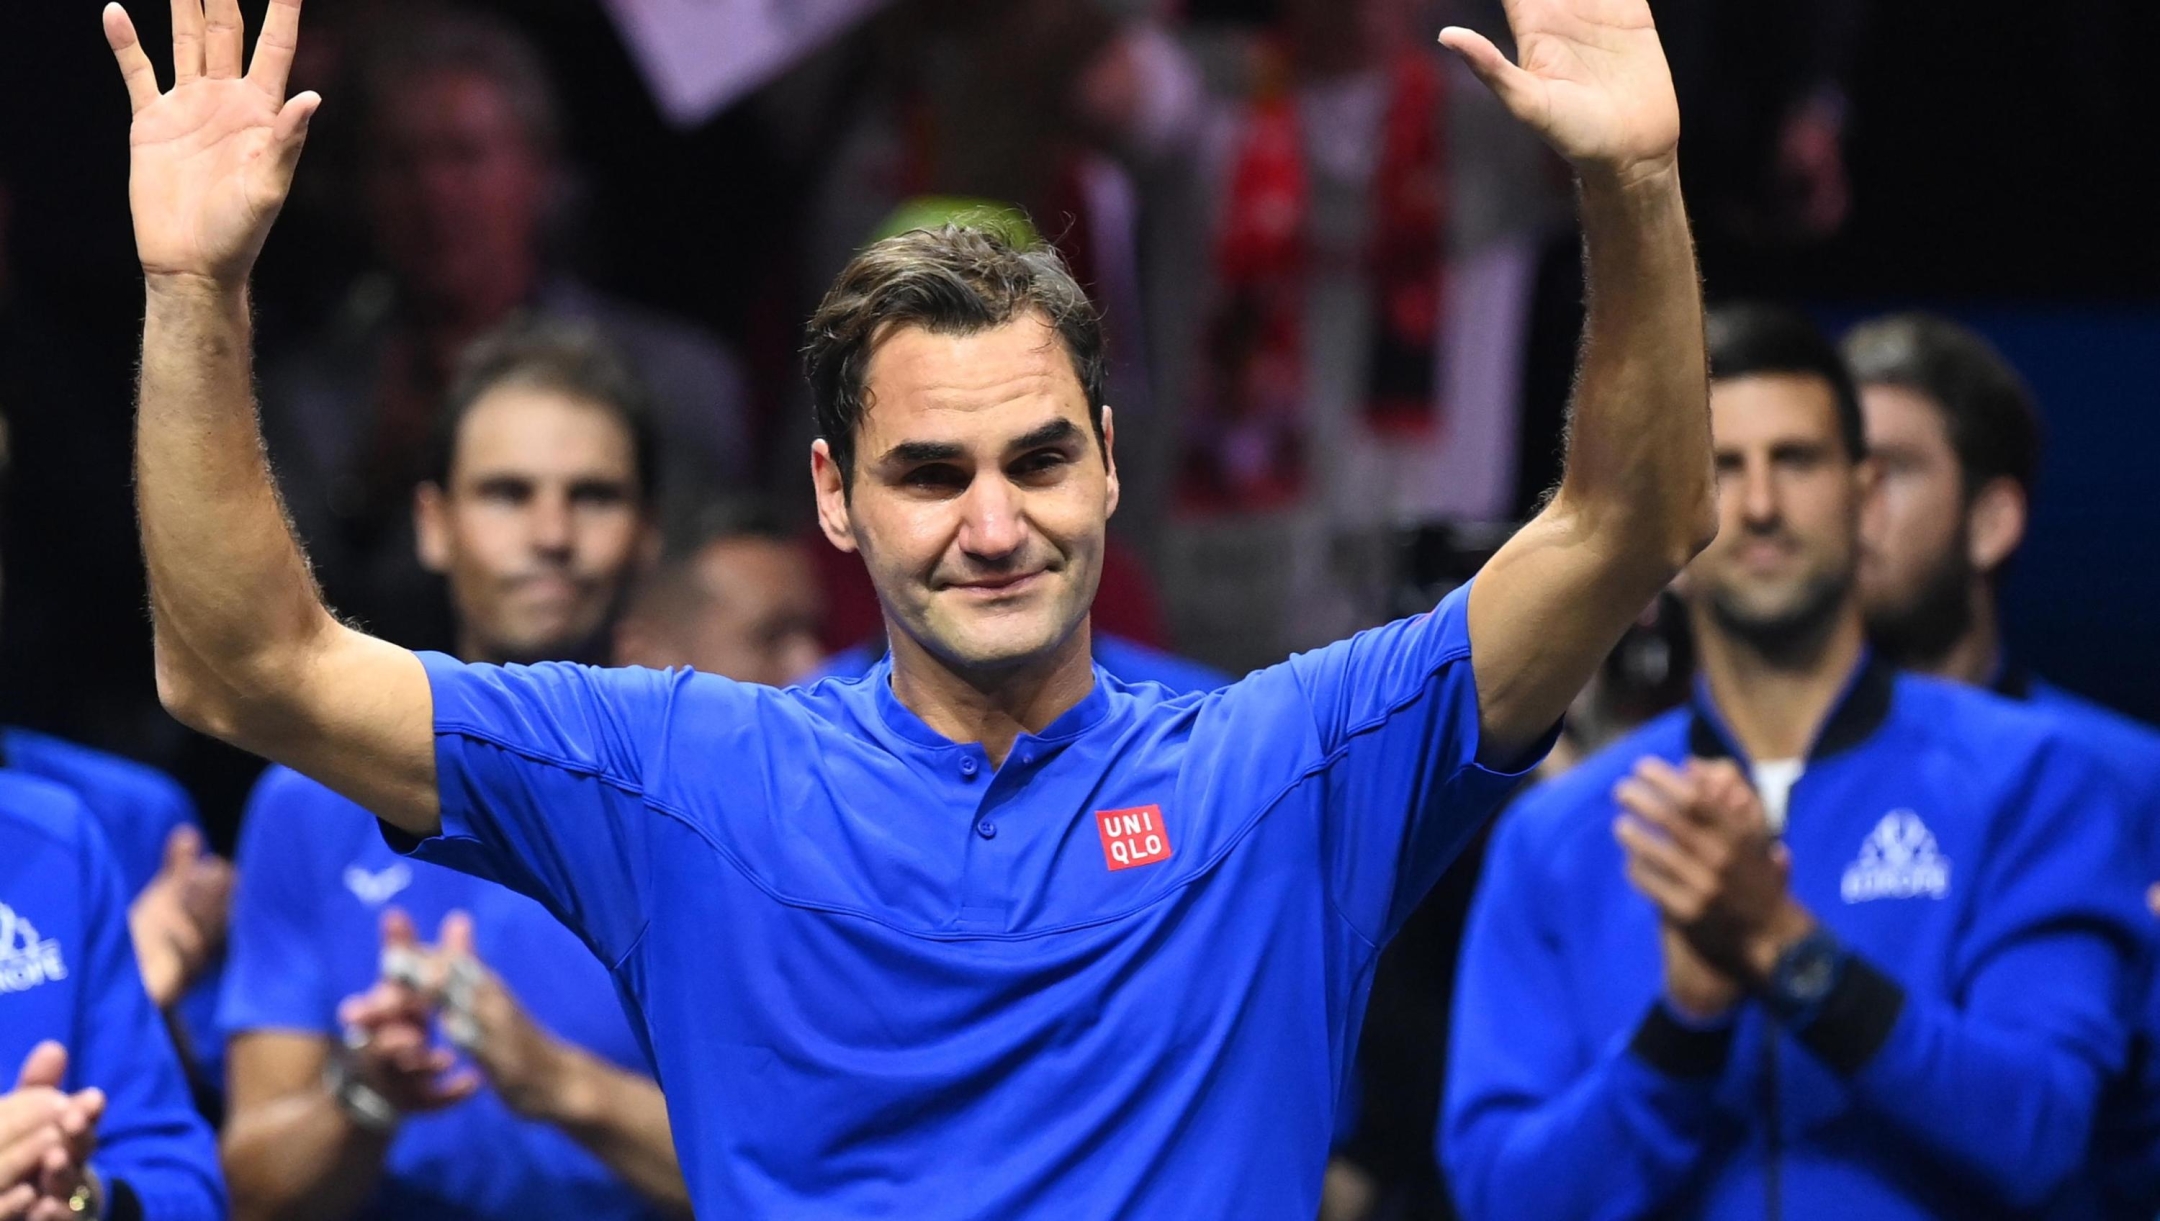 epa10202794 Team Europe player Roger Federer of Switzerland waves to the crowd after playing the doubles match with Rafael Nadal (rear L) of Spain against Team World double Jack Sock of the US and Frances Tiafoe of the US on the first day of the Laver Cup tennis tournament in London, Britain, 23 September 2022. The match was Federer's last game before retirement.  EPA/ANDY RAIN